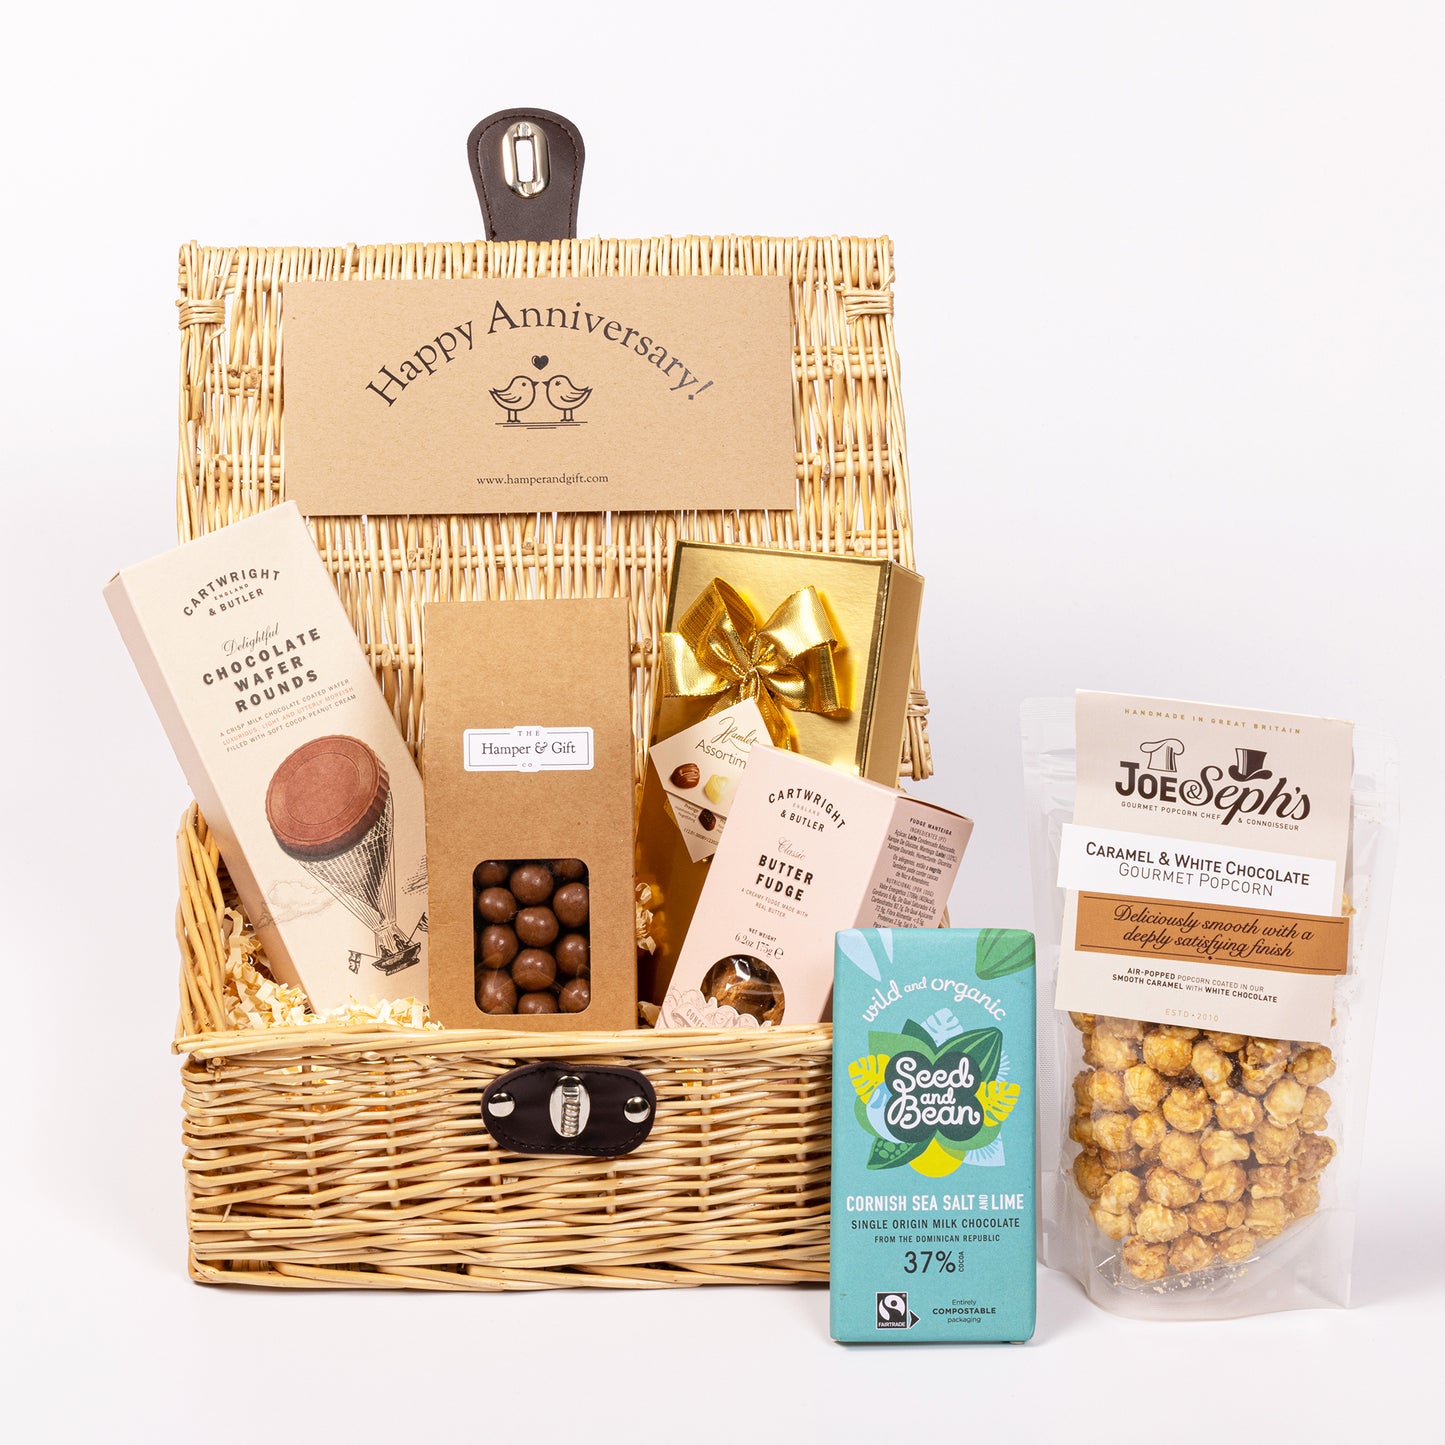 Anniversary Chocolate & Fudge Hamper filled with a variety of chocolate, fudge, biscuit and gourmet popcorn